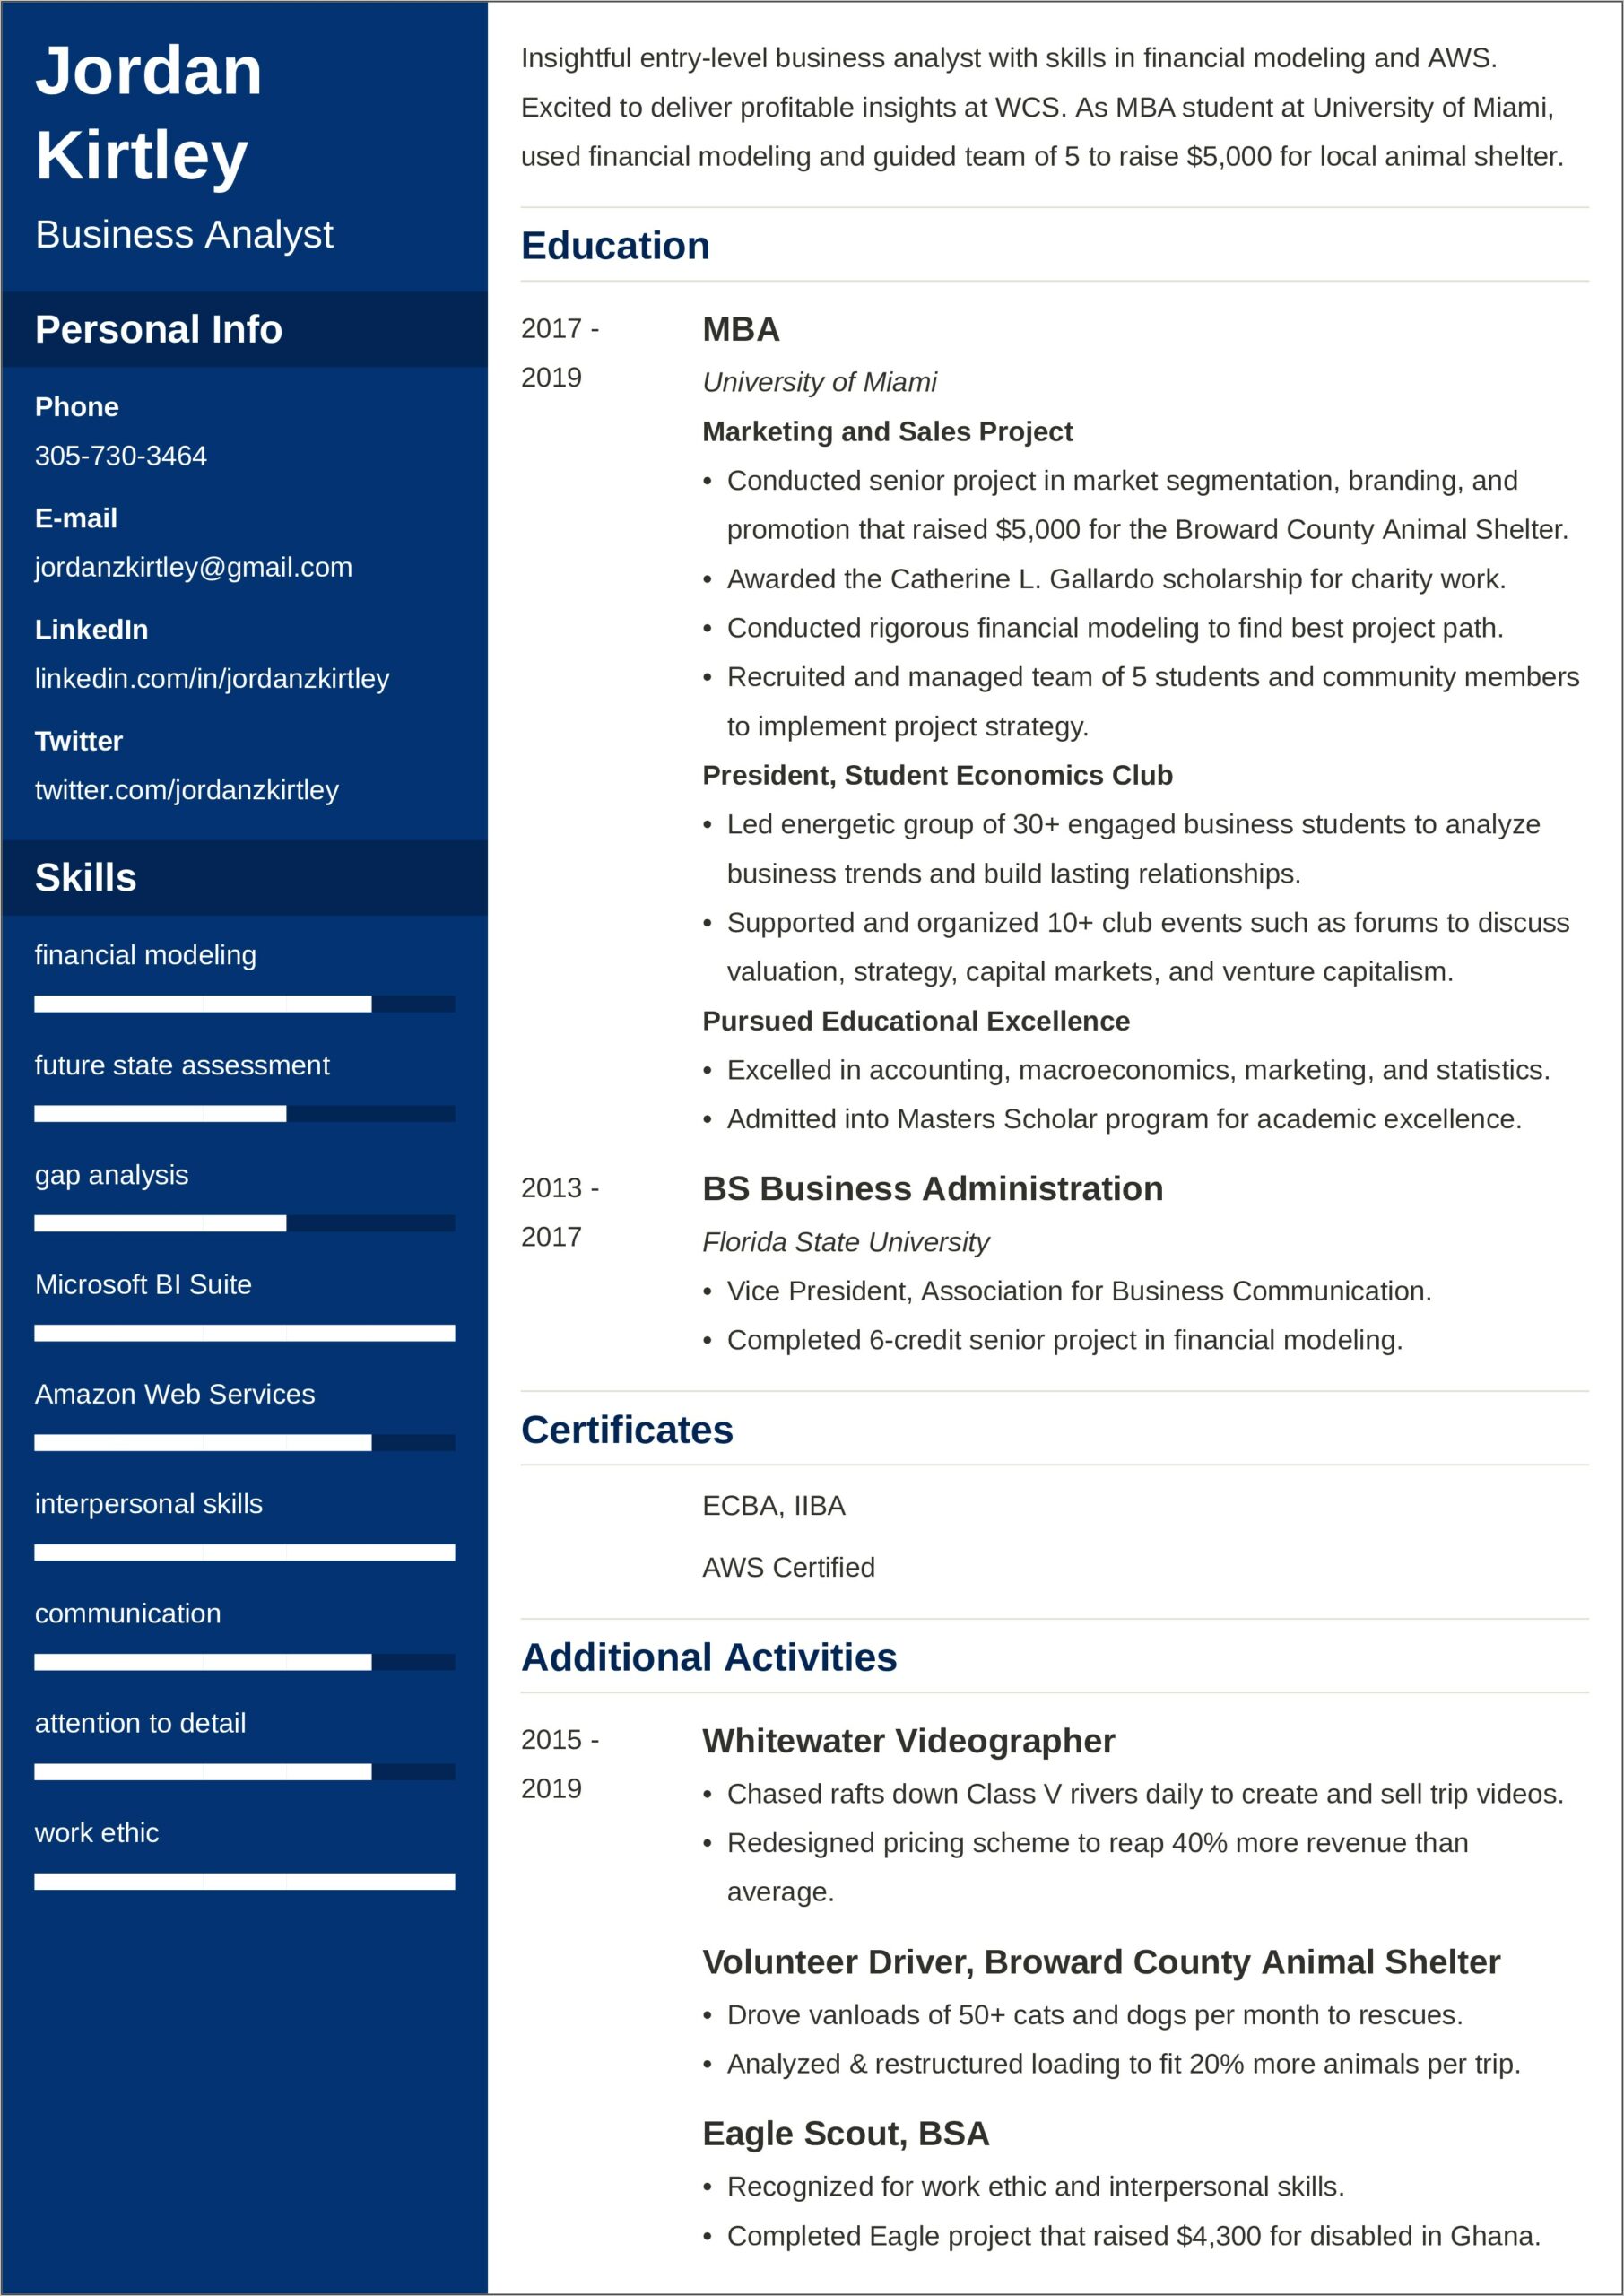 Best Resume Format For Experienced Business Analyst